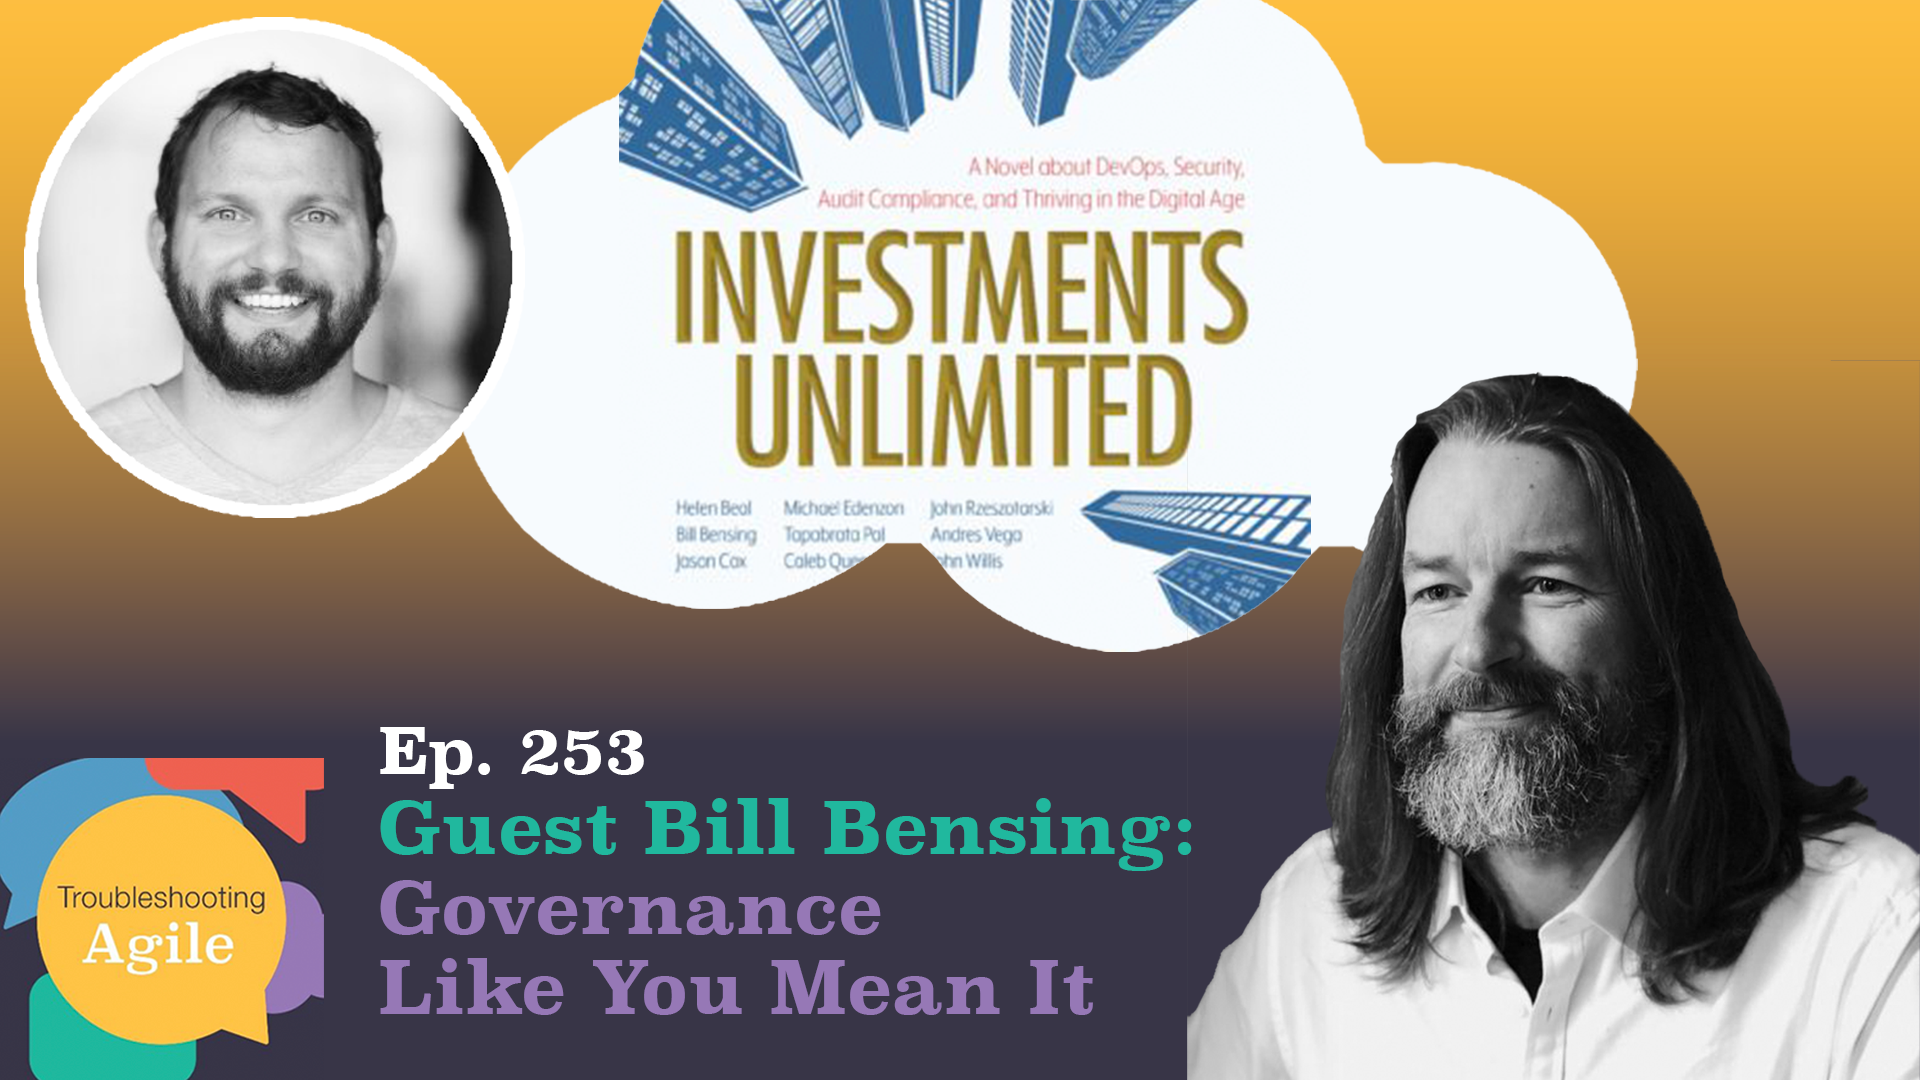 Governance Like You Mean It, with Bill Bensing